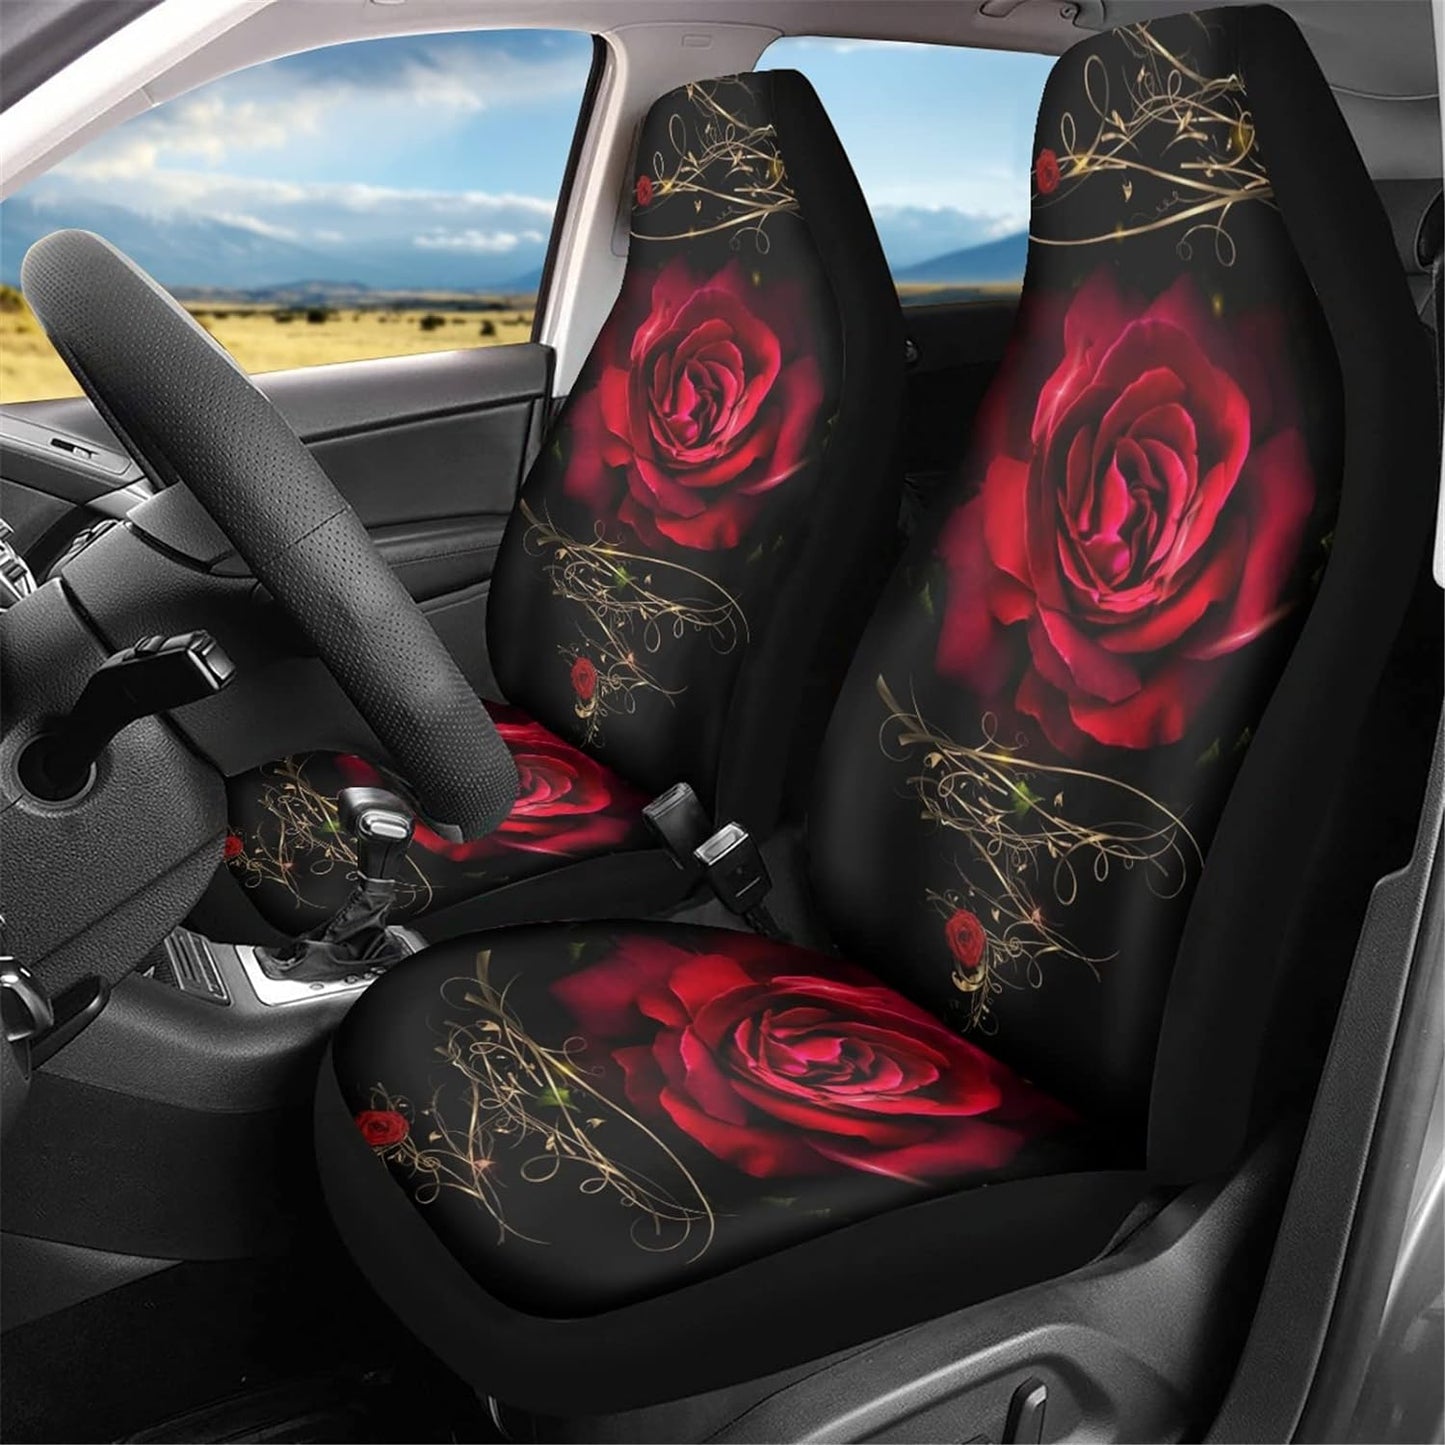 Car Seat Cover for Front Seat Only Red Rose Flower Easy to Install Car Accessories Universal Fit for SUV Truck Vans Sedans Bucket Seat Protector Car Seat Cushions for Women Men